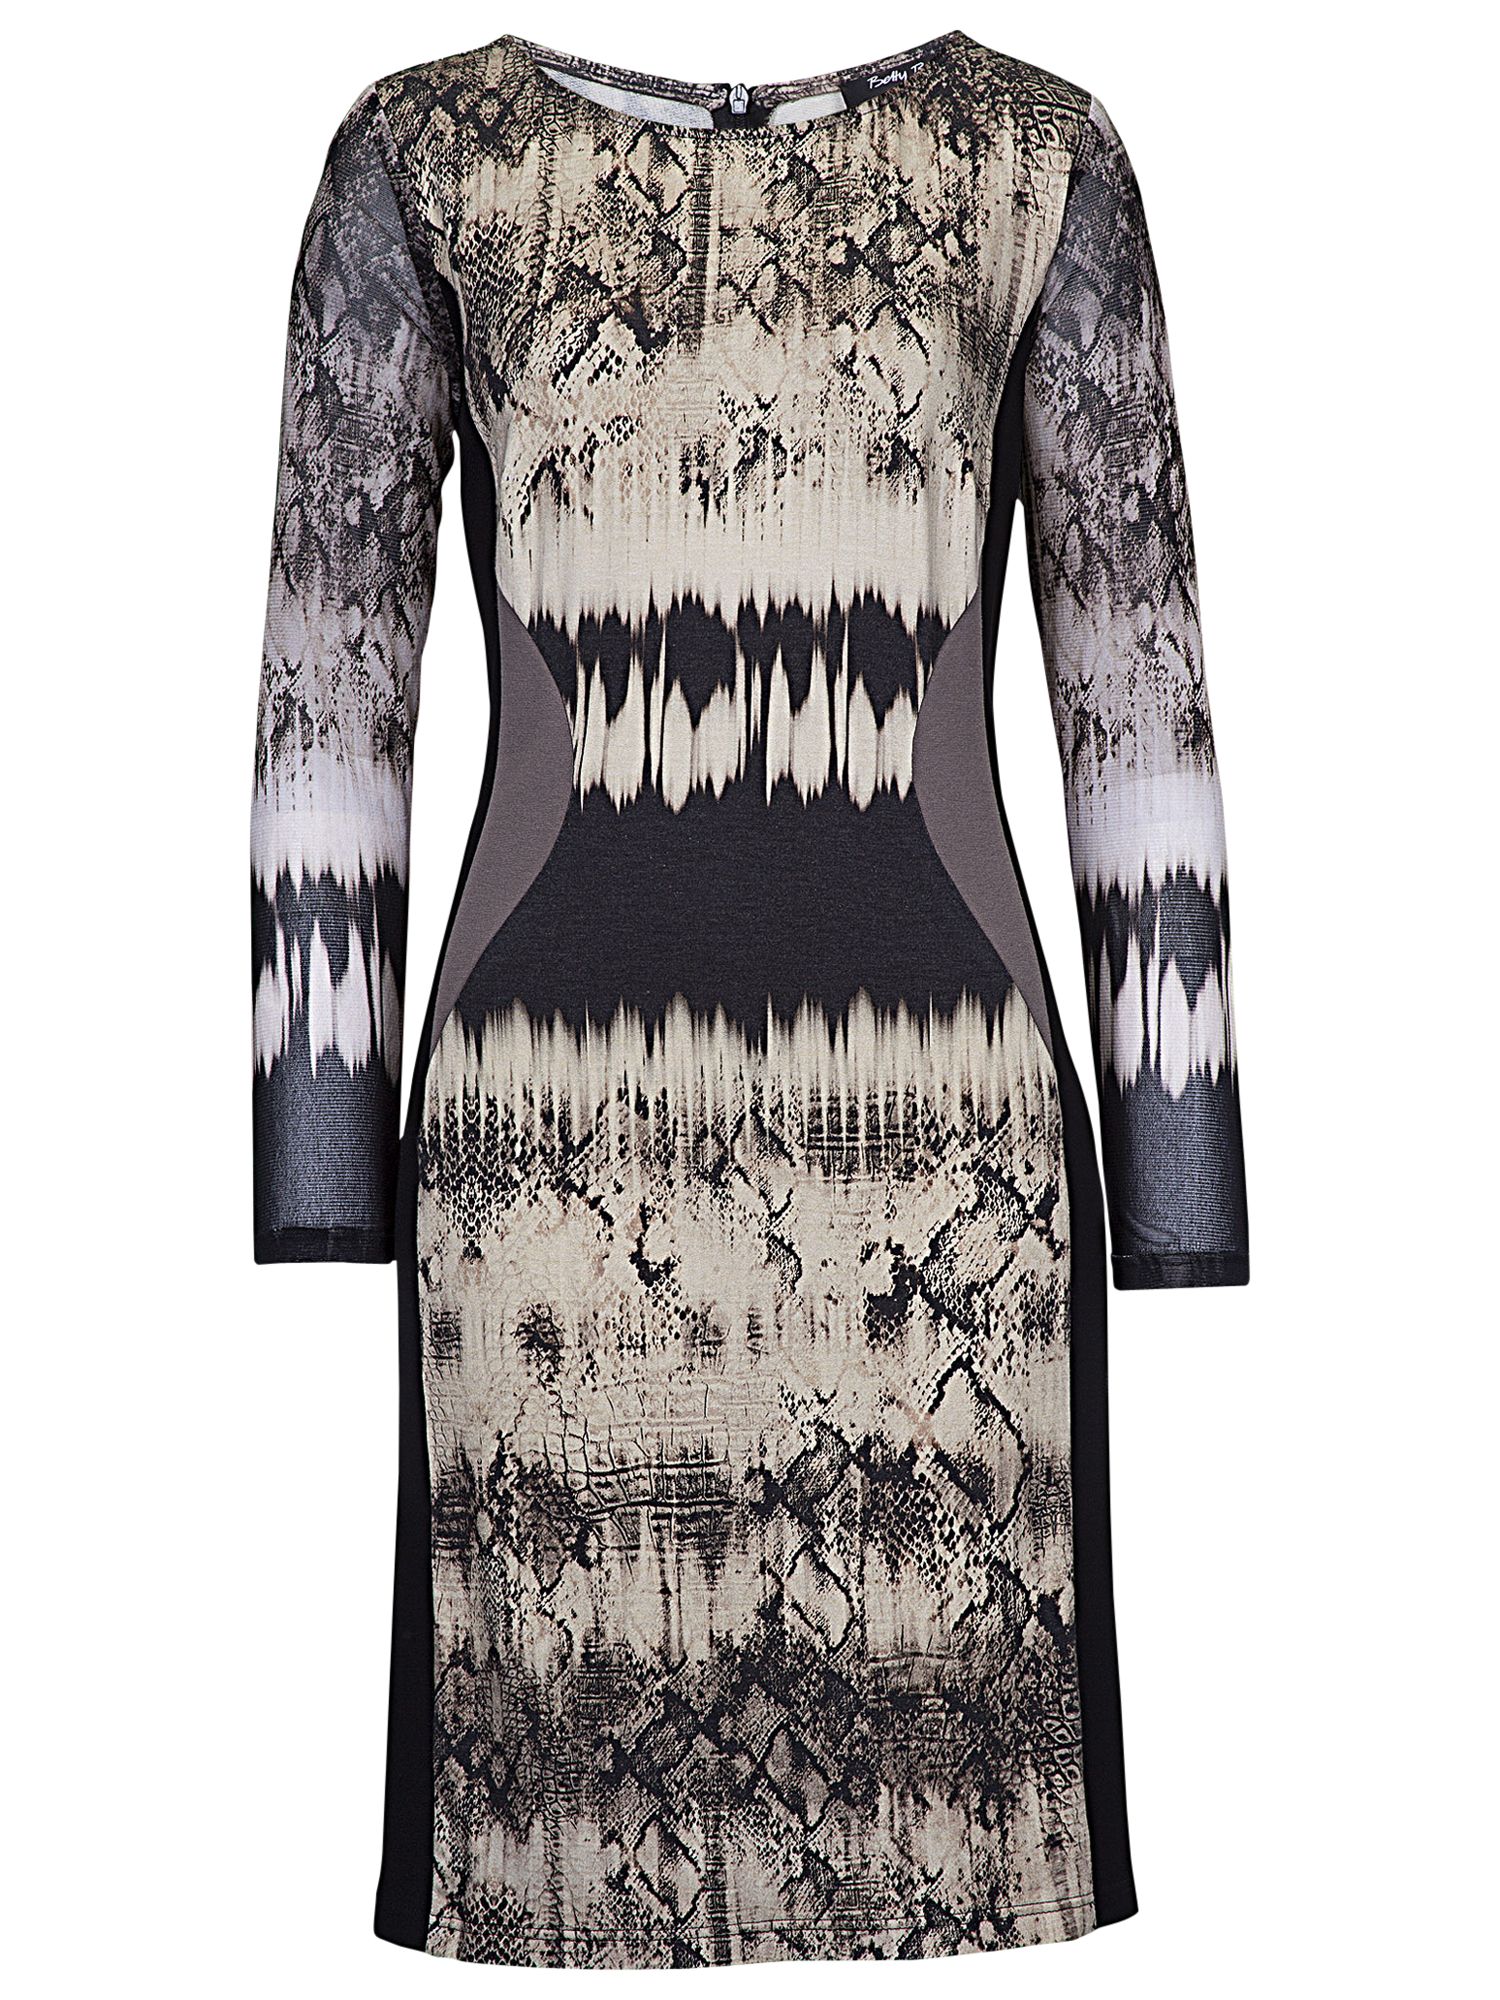 Buy Betty Barclay Snake Print Dress, Black/Taupe Online at johnlewis.com